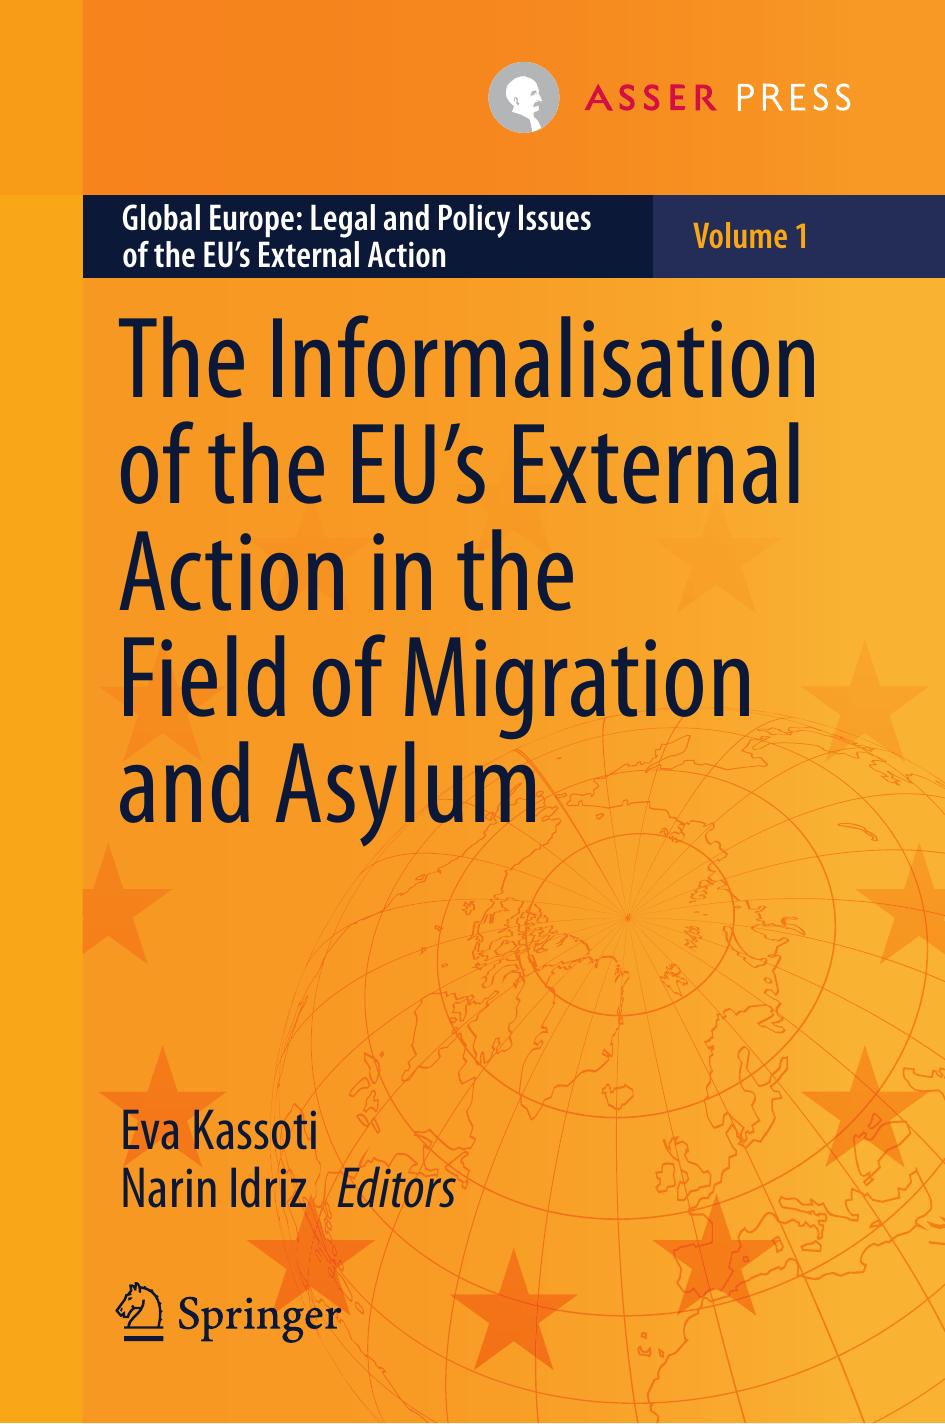 The Informalisation of the EU's External Action in the Field of Migration and Asylum 2022